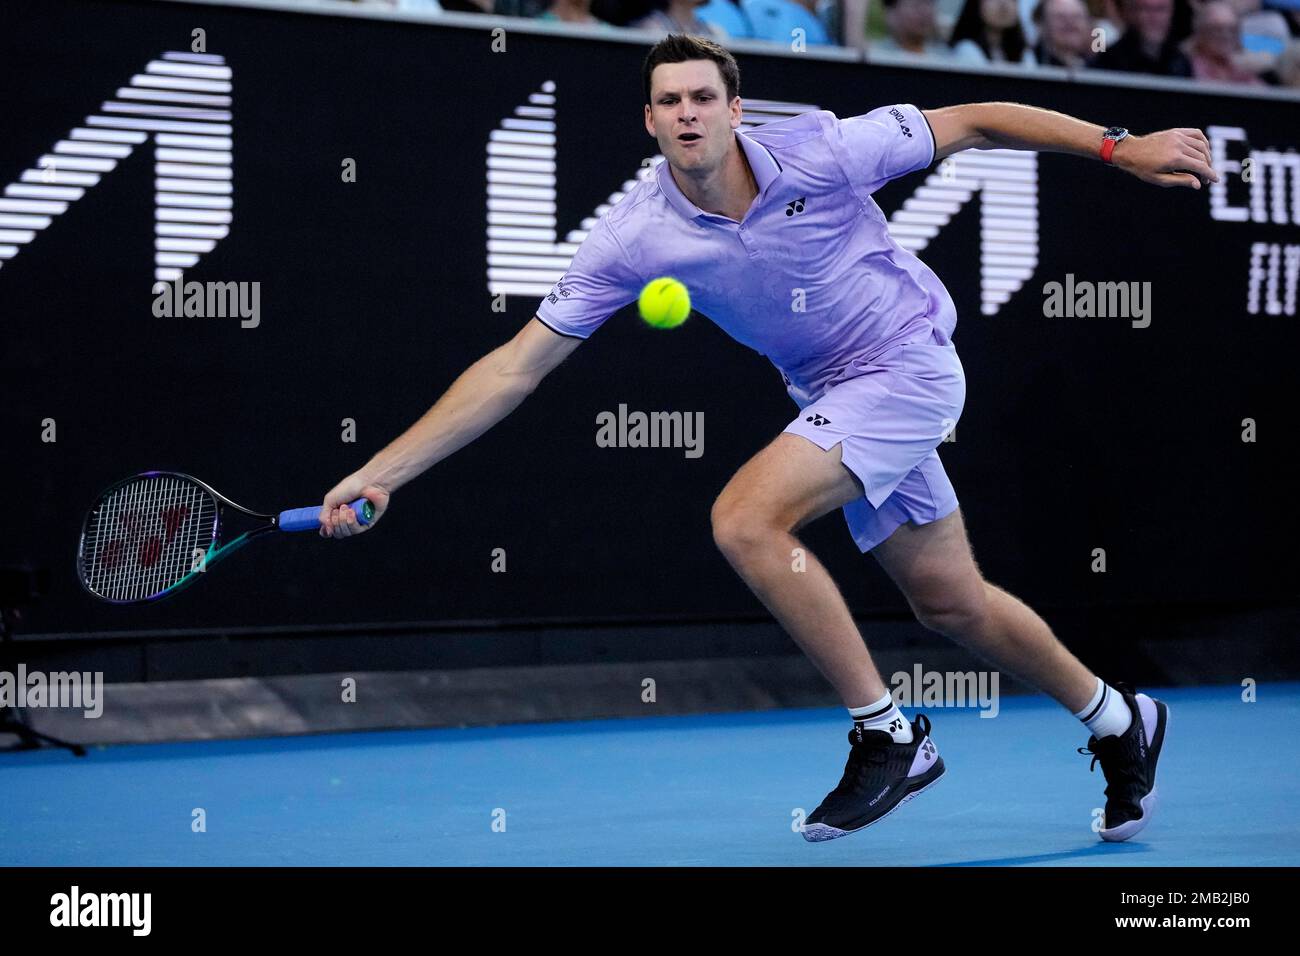 Hubert Hurkacz of Poland plays a forehand return to Denis Shapovalov of  Canada during their third round match at the Australian Open tennis  championship in Melbourne, Australia, Friday, Jan. 20, 2023. (AP